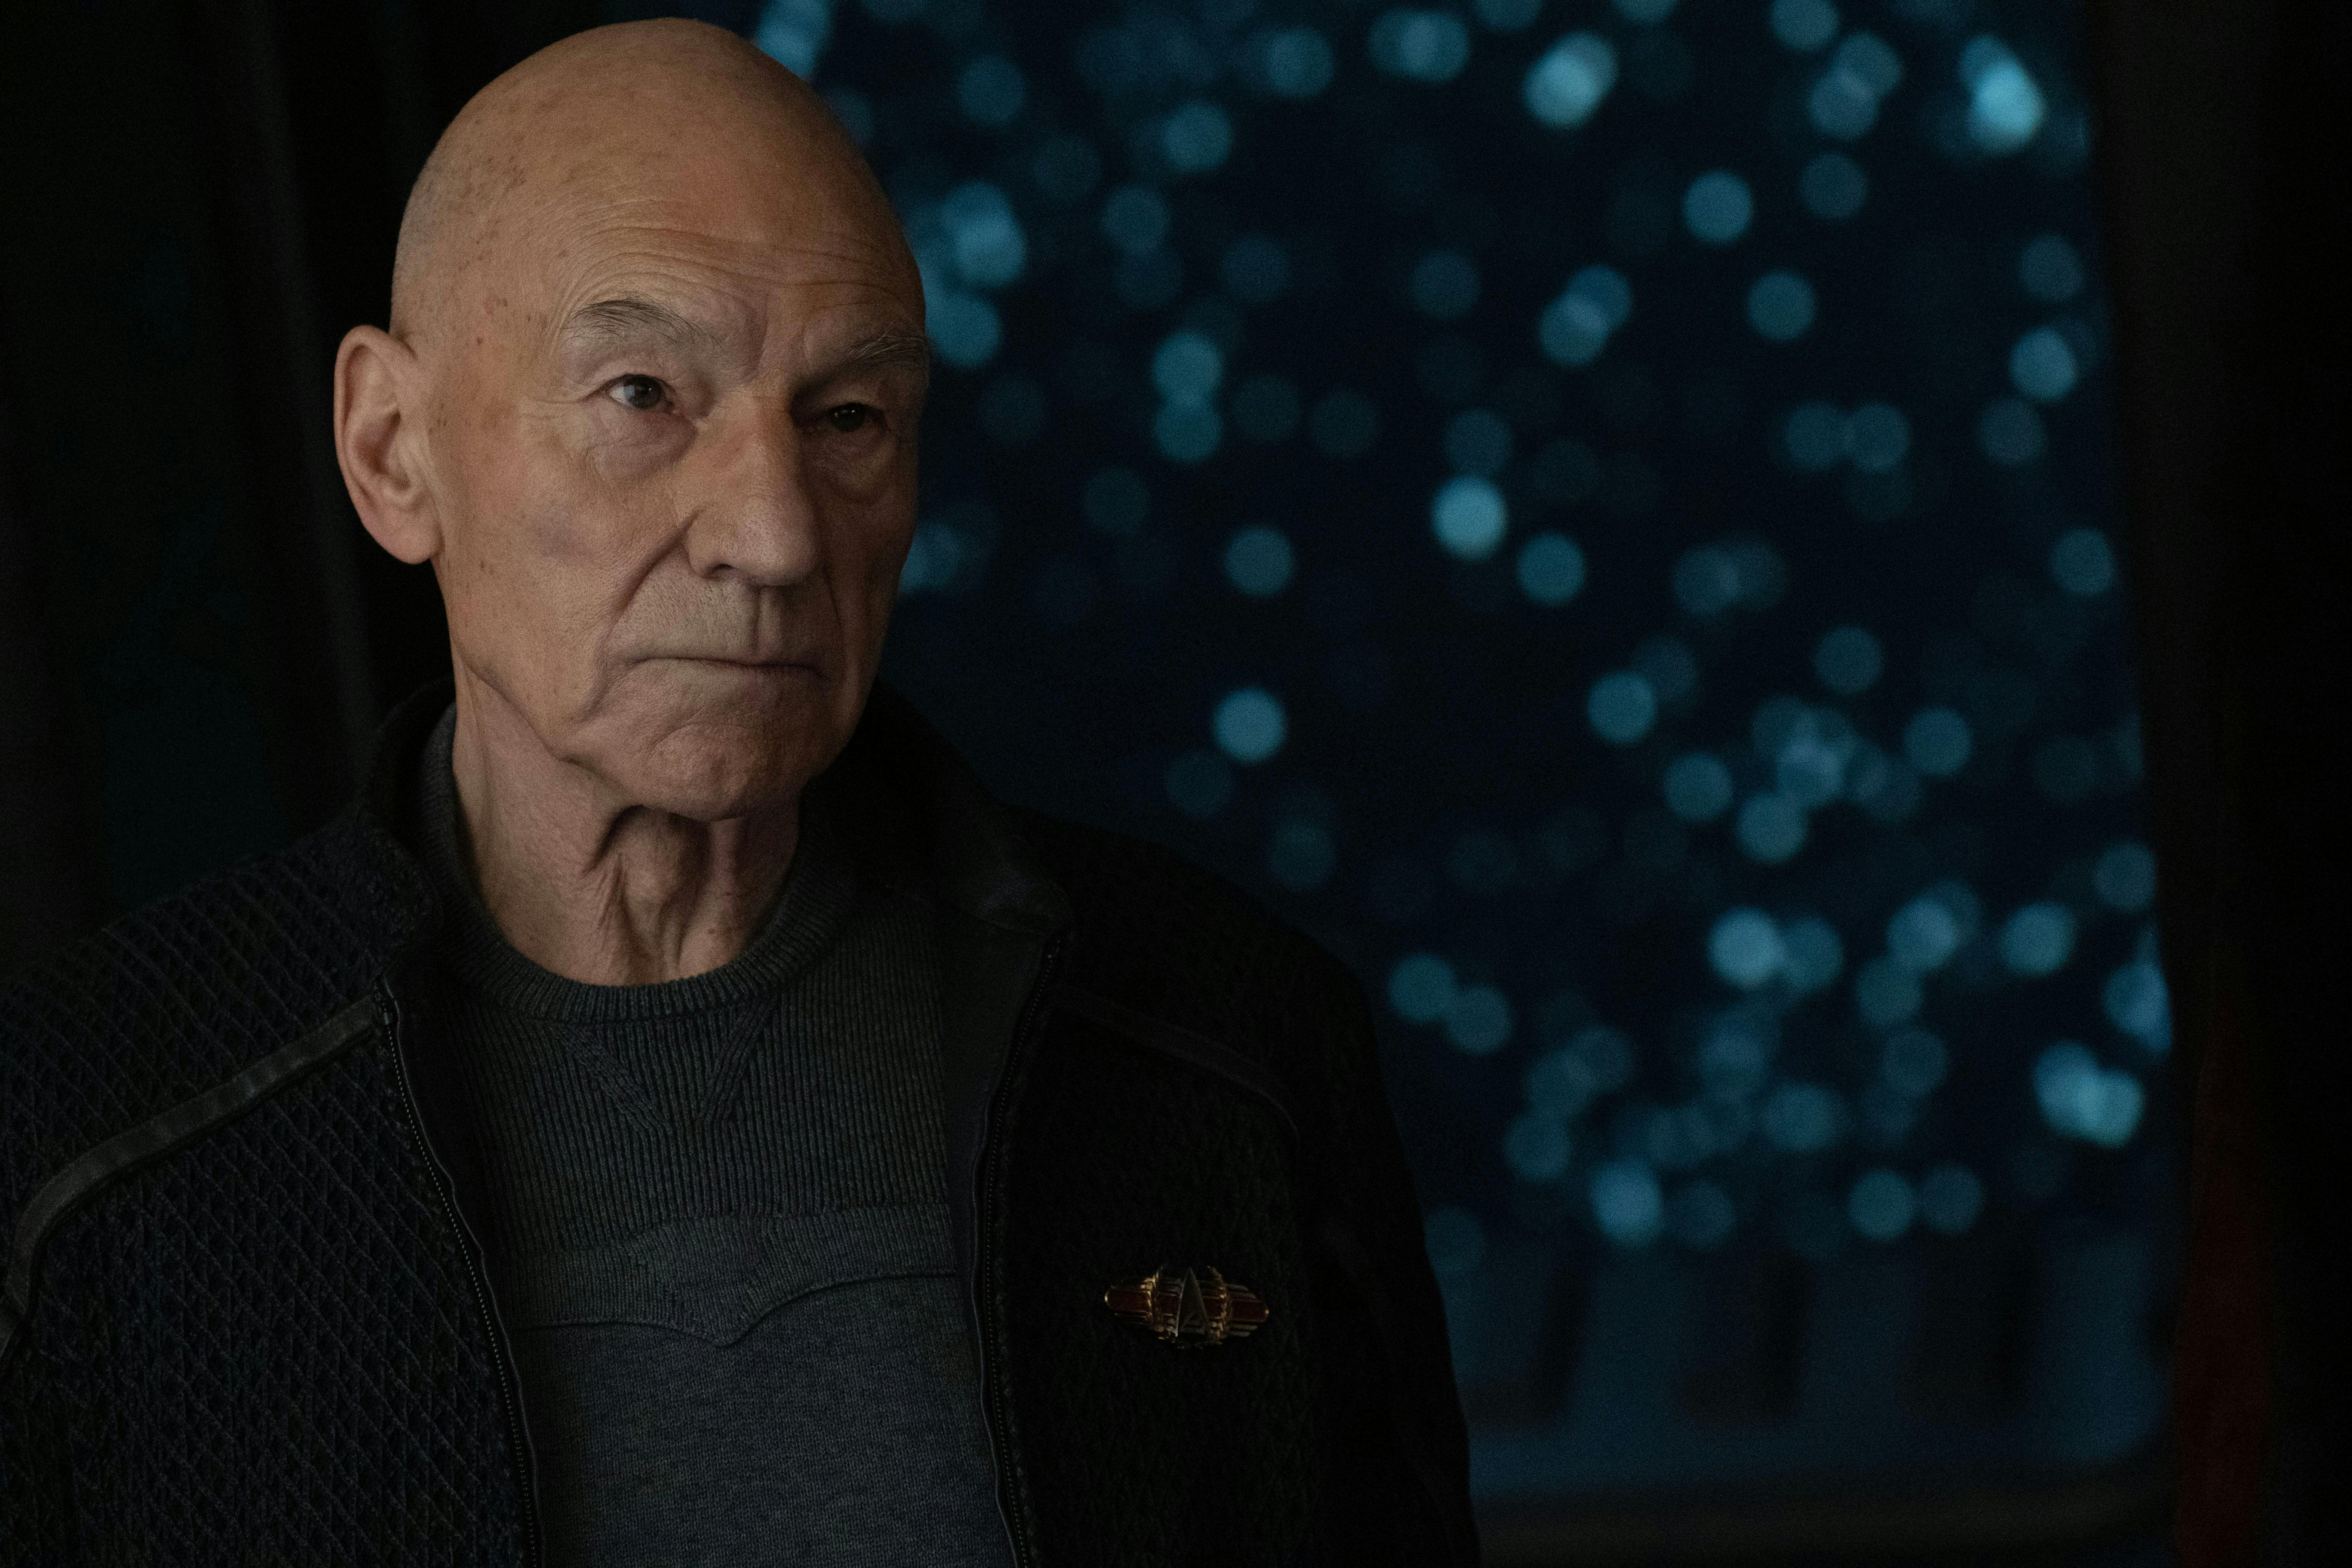 A close-up of Picard who looks ahead